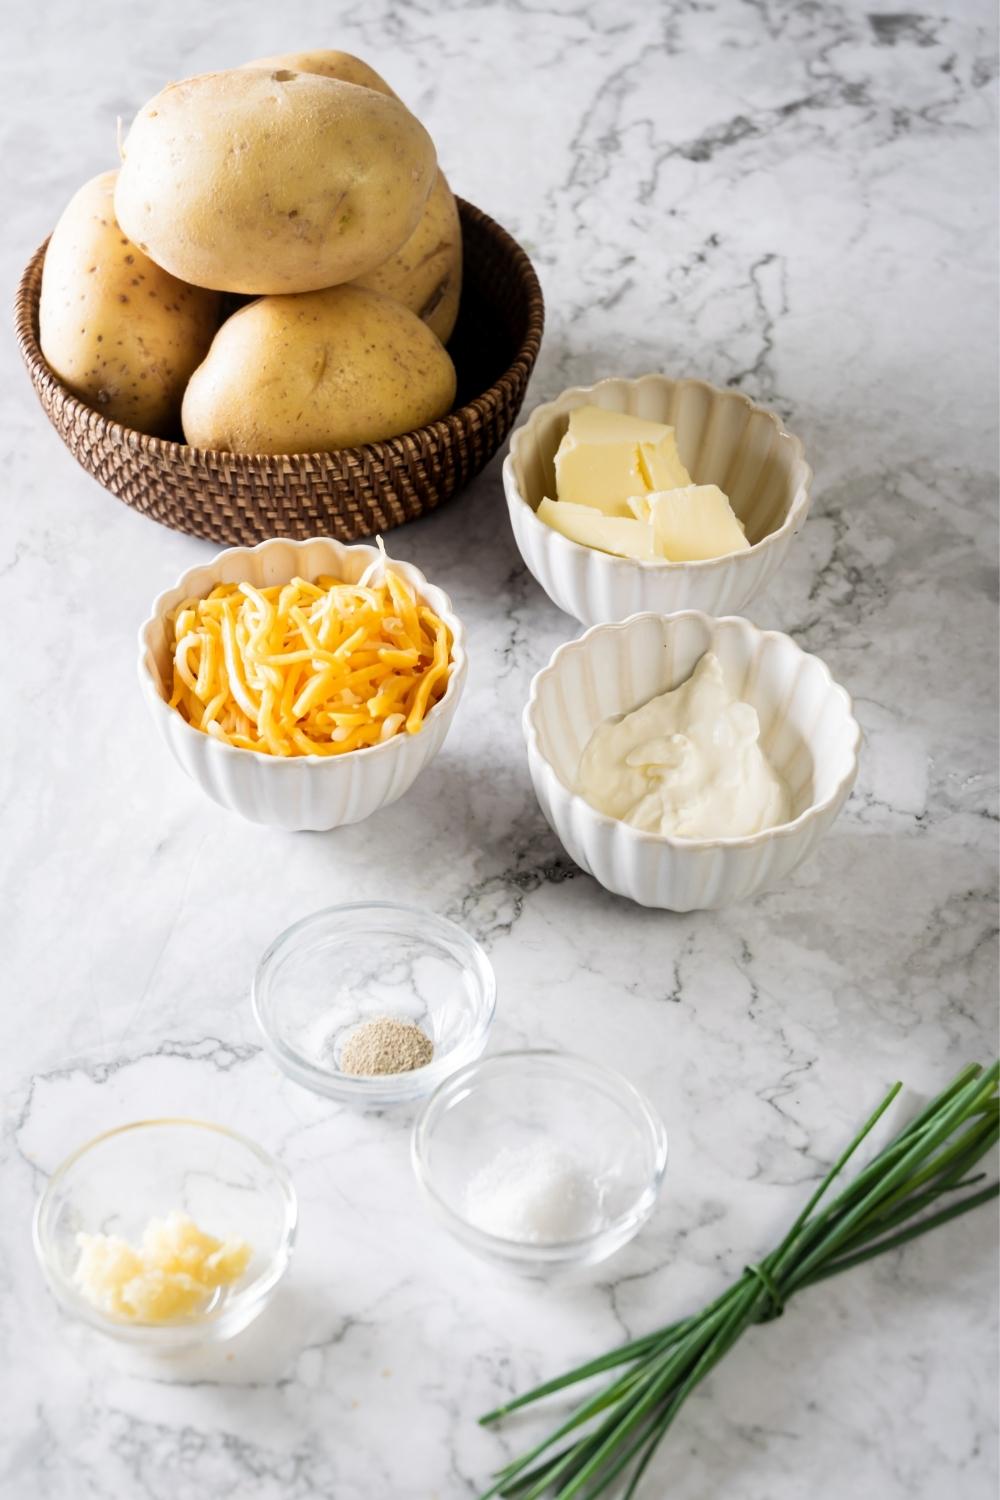 A bowl of potatoes, a bowl of cheddar cheese, a bowl of butter, a bowl of sour cream, a small bowl of salt, and a small bowl of pepper all on a white counter.